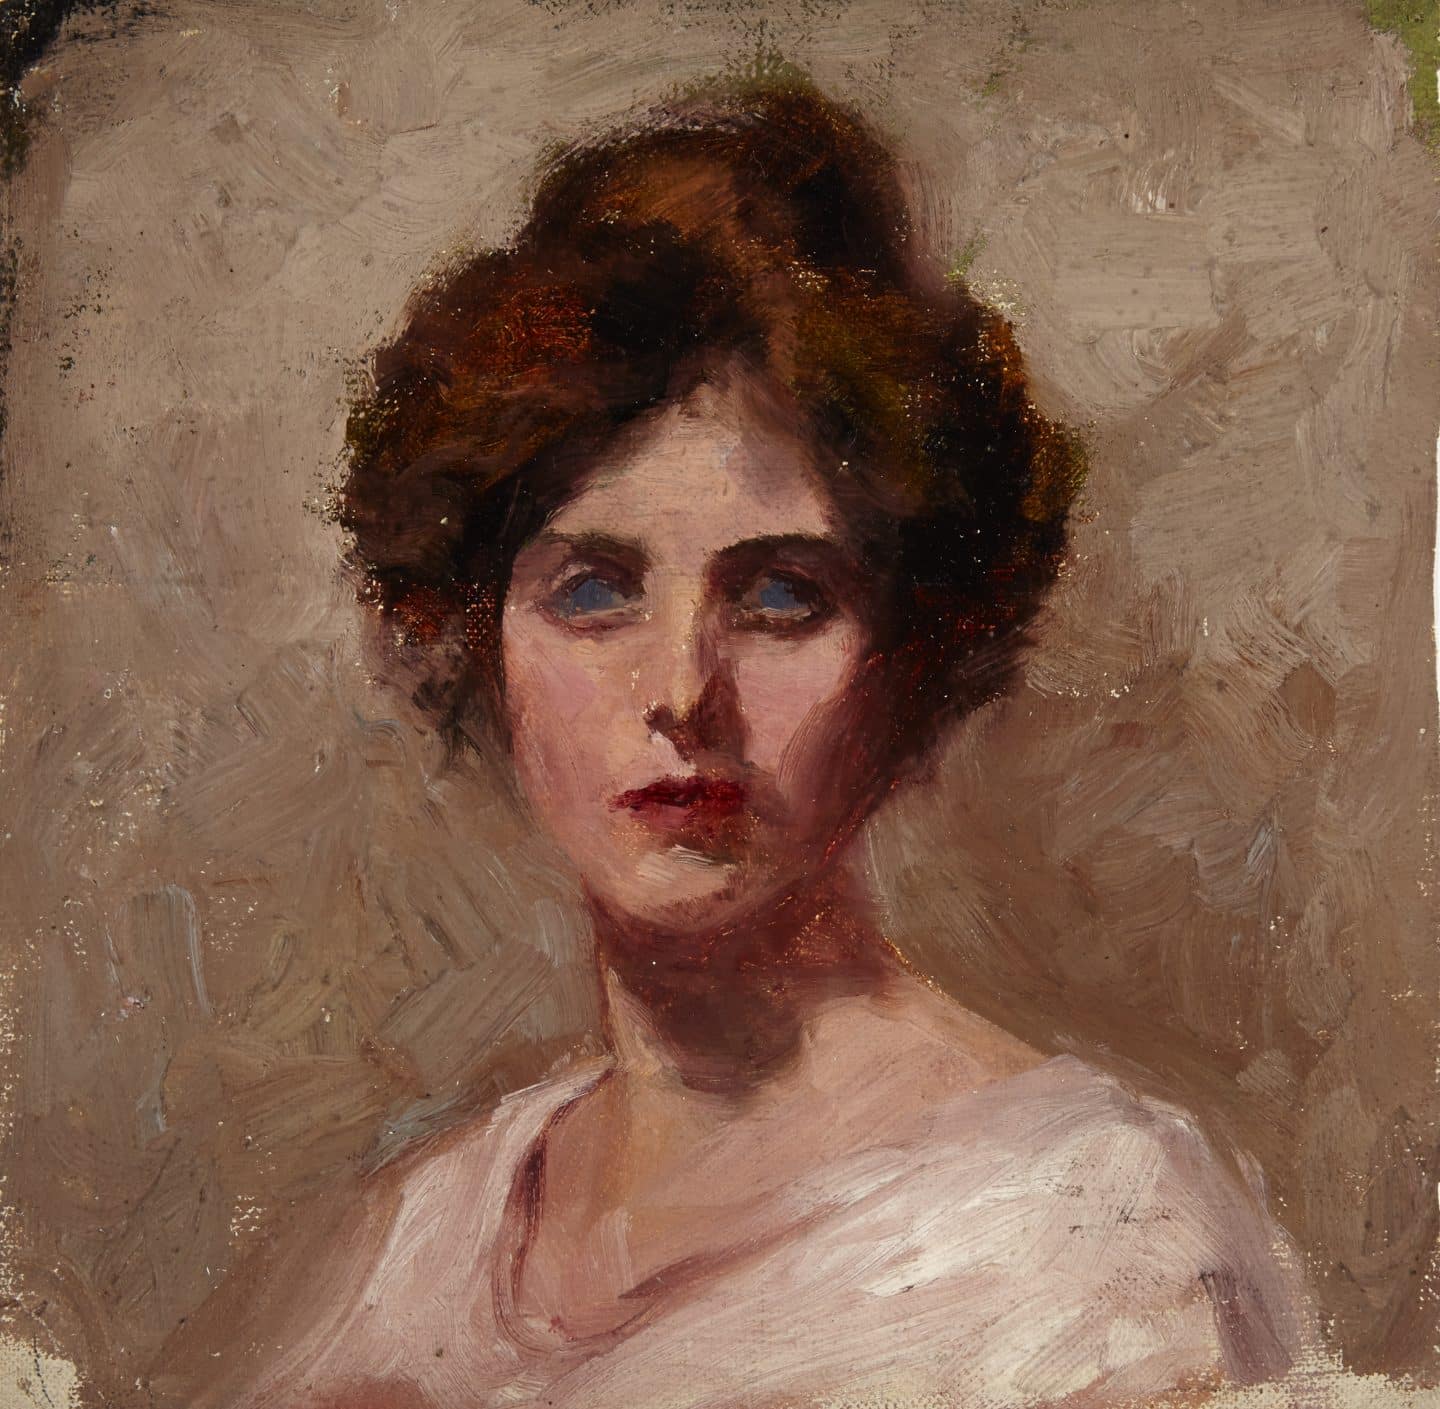 Bertha May Ingle, Self-Portrait, around 1902, oil on canvas. Private collection. Photo: Mike Lalich